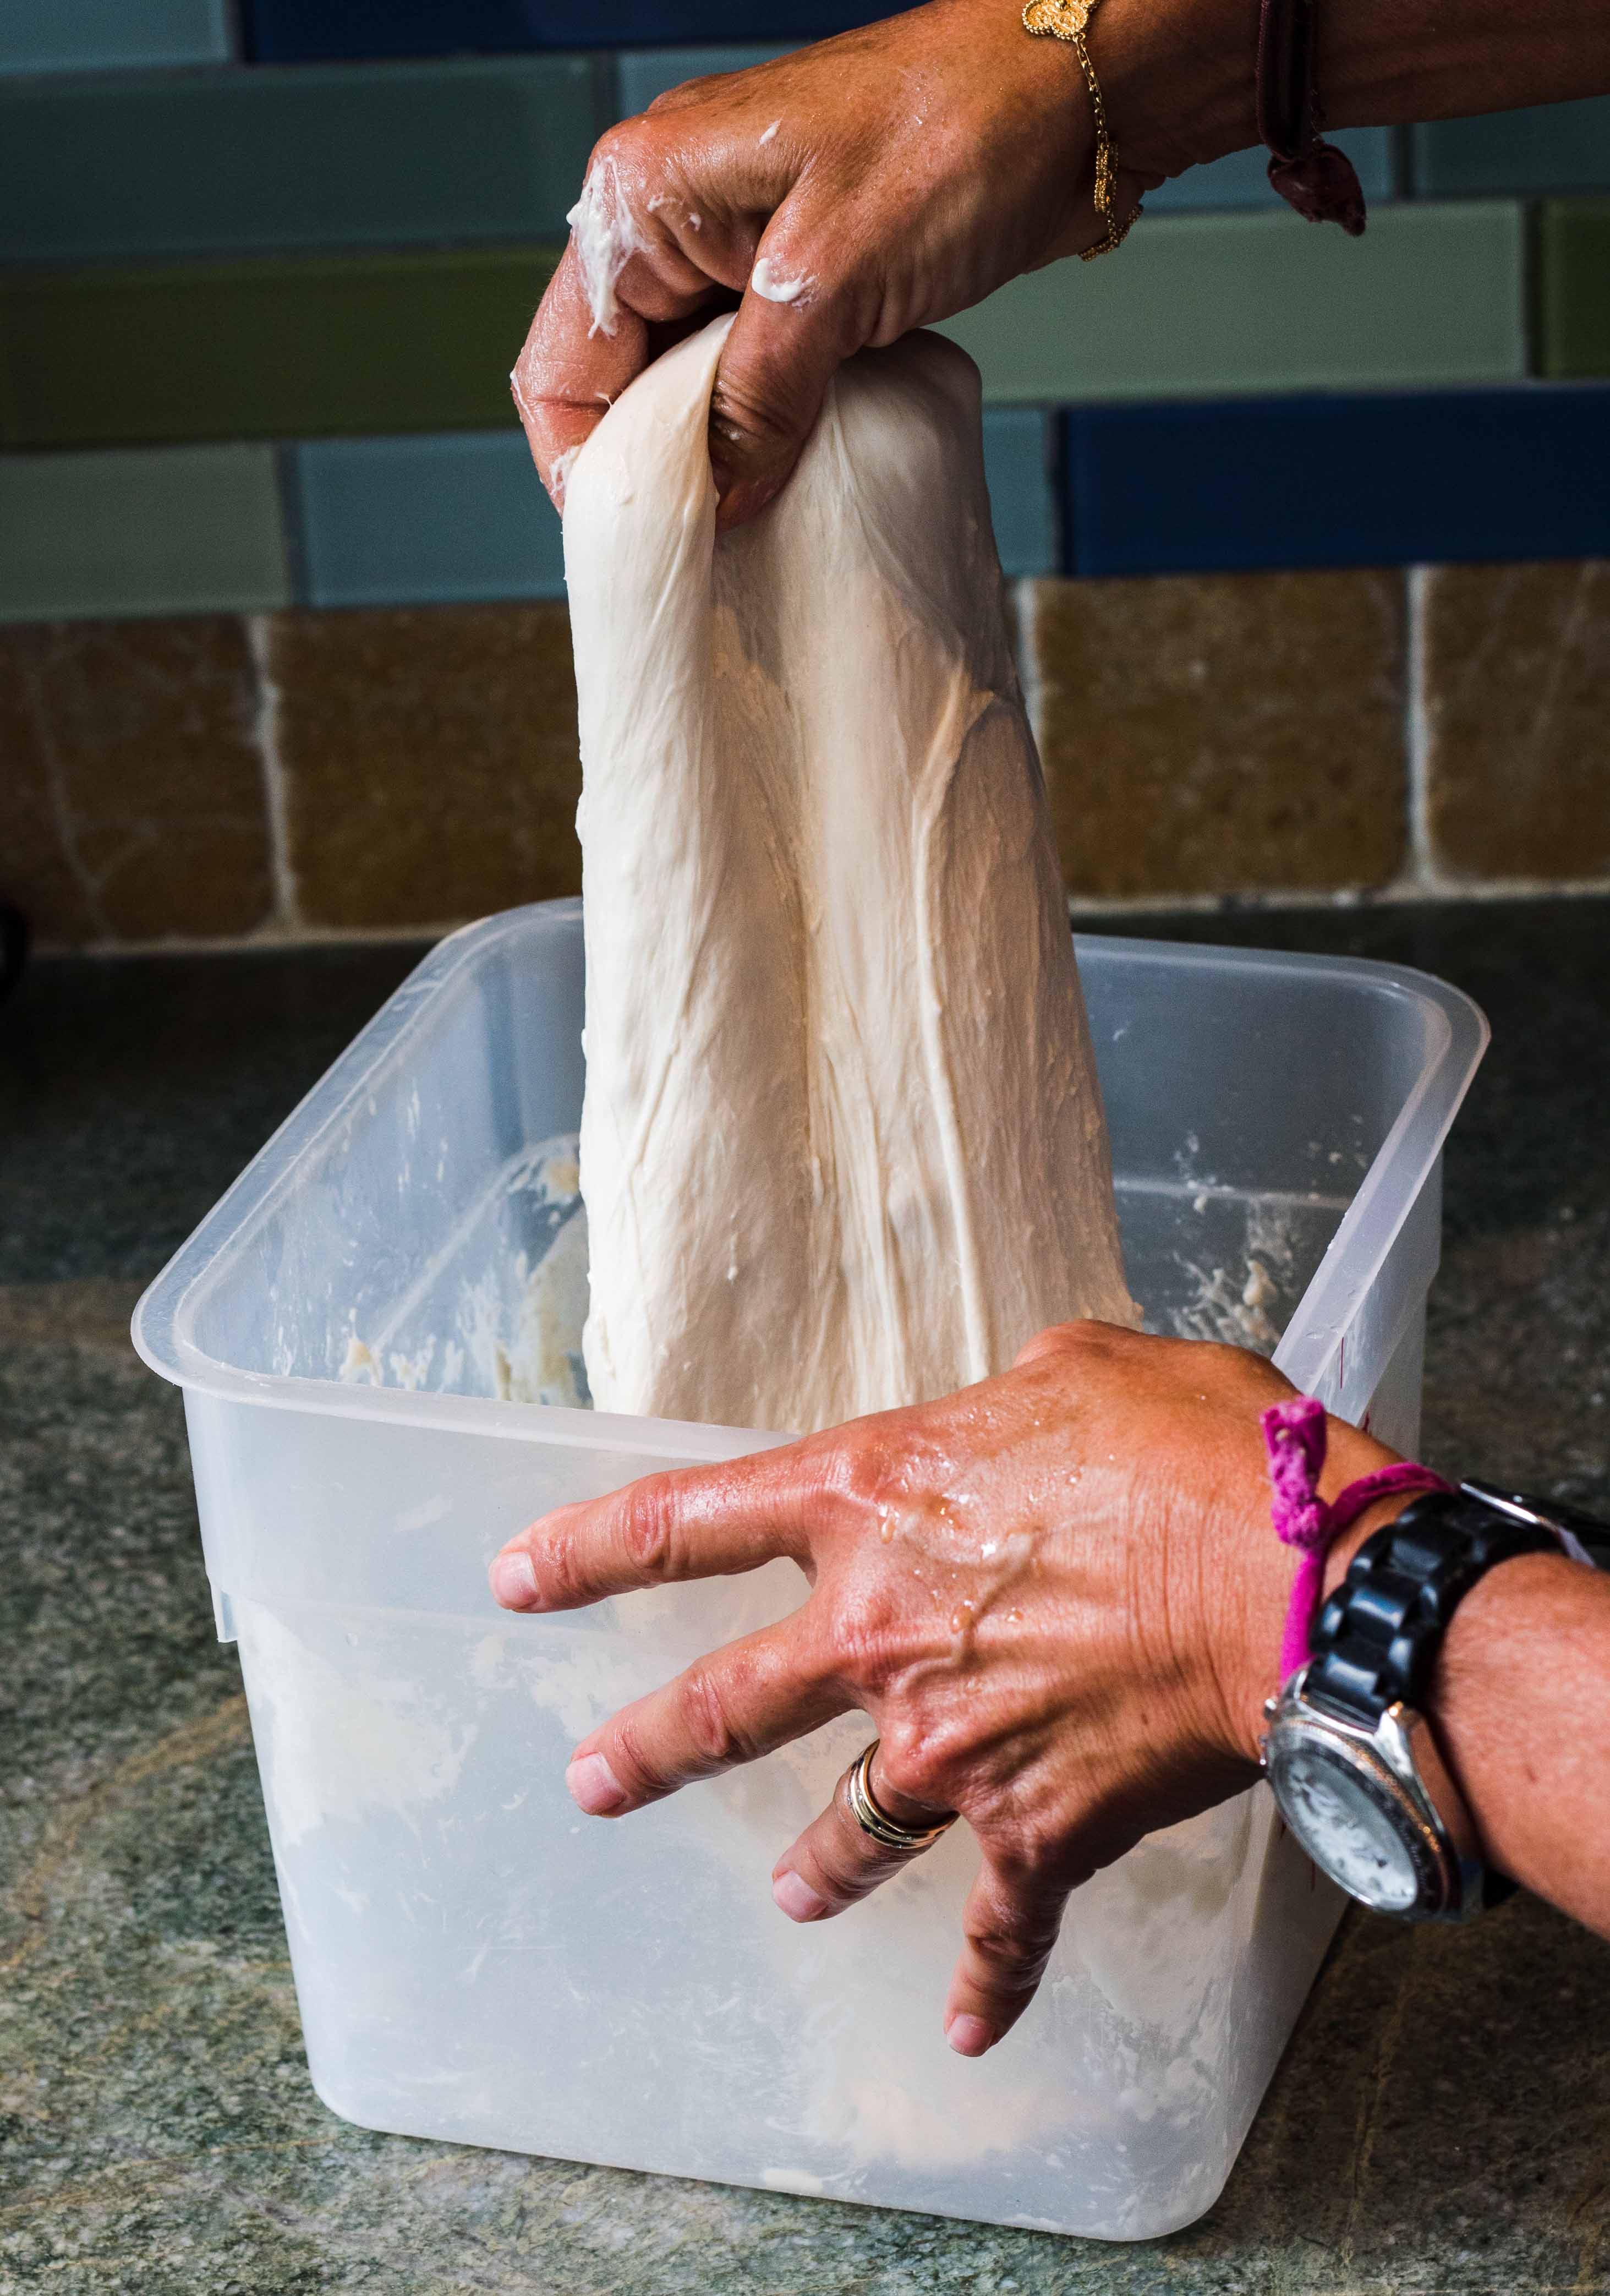 Pulling wet dough out of container to fold it